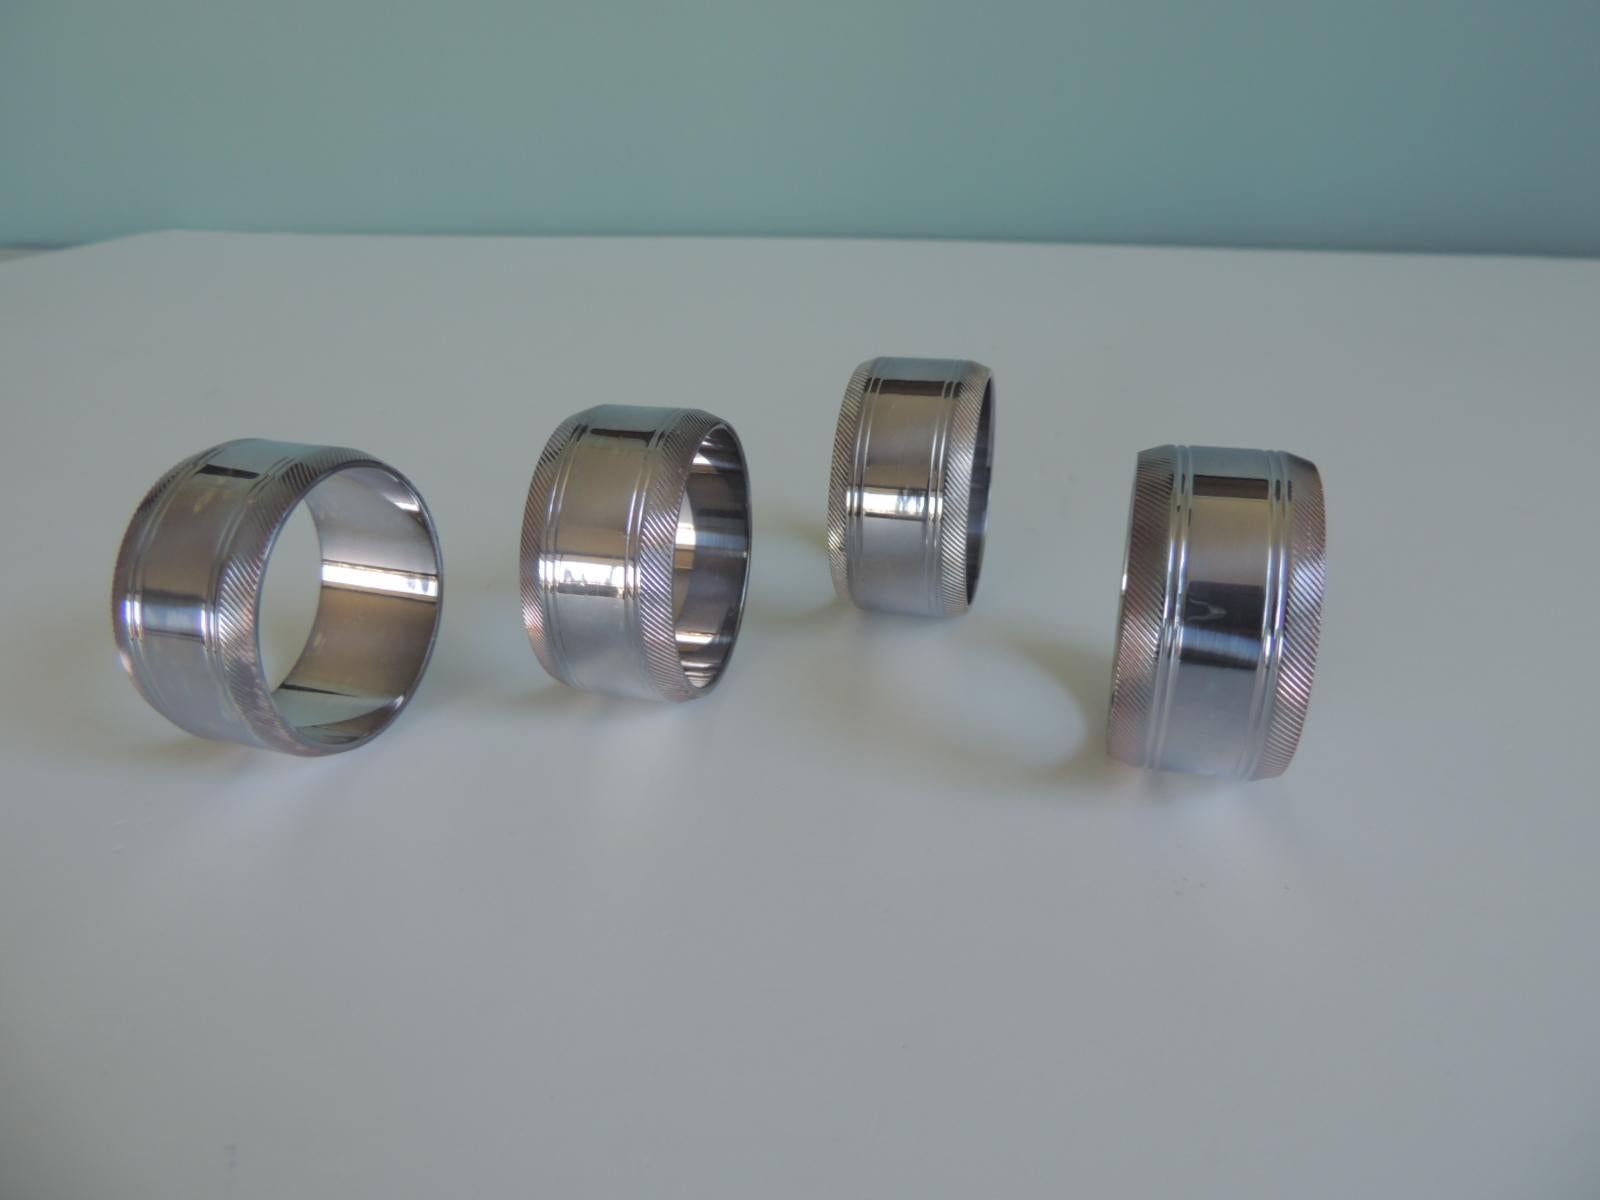 Set of (4) Silver Plated Round Napkin Ring Holders.
Classic Style.
Size: 1.75